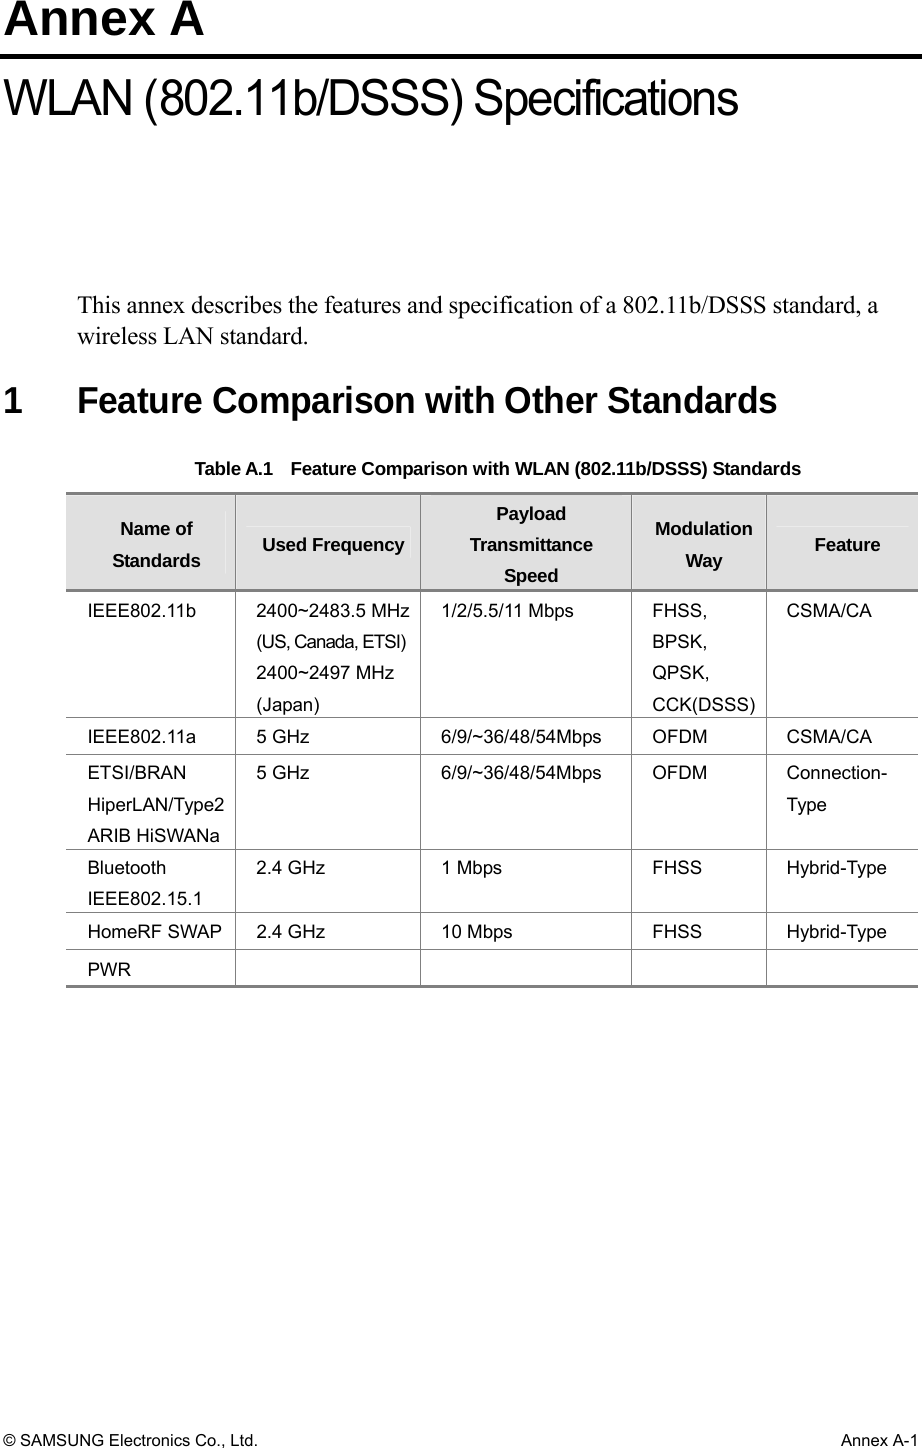 Annex A © SAMSUNG Electronics Co., Ltd.  Annex A-1 WLAN (802.11b/DSSS) Specifications This annex describes the features and specification of a 802.11b/DSSS standard, a wireless LAN standard.  1  Feature Comparison with Other Standards Table A.1  Feature Comparison with WLAN (802.11b/DSSS) Standards   Name of Standards  Used FrequencyPayload Transmittance Speed Modulation Way  Feature IEEE802.11b 2400~2483.5 MHz(US, Canada, ETSI)2400~2497 MHz (Japan) 1/2/5.5/11 Mbps  FHSS, BPSK,  QPSK,  CCK(DSSS) CSMA/CA IEEE802.11a 5 GHz  6/9/~36/48/54Mbps OFDM  CSMA/CA ETSI/BRAN HiperLAN/Type2 ARIB HiSWANa 5 GHz  6/9/~36/48/54Mbps  OFDM  Connection- Type Bluetooth IEEE802.15.1 2.4 GHz  1 Mbps  FHSS  Hybrid-Type HomeRF SWAP  2.4 GHz  10 Mbps  FHSS  Hybrid-Type PWR               